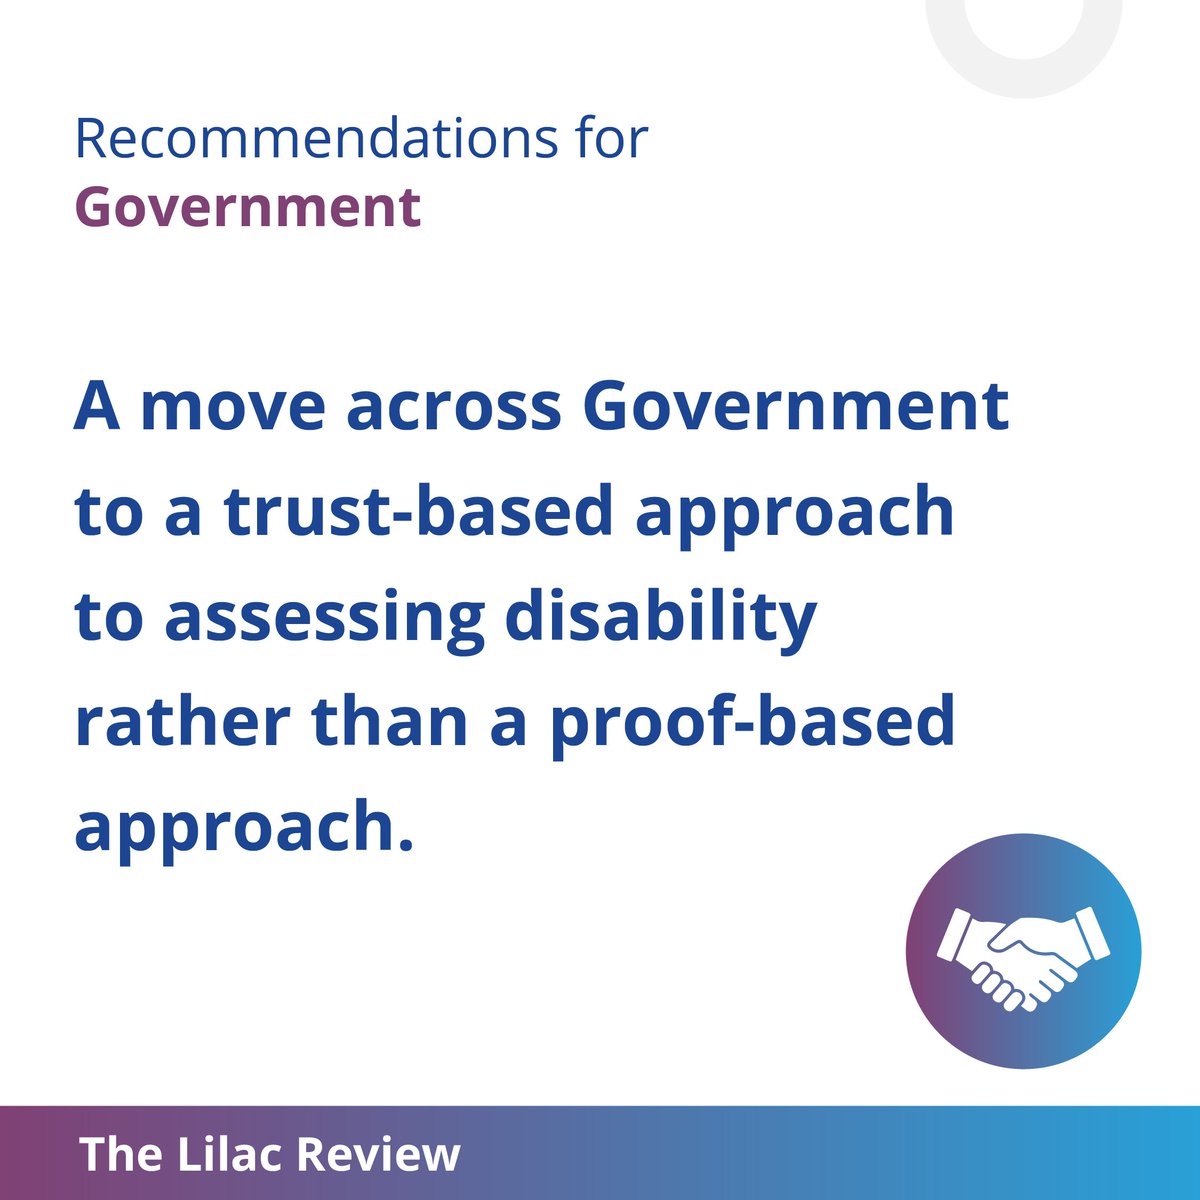 Excited to share the @lilacreviewuk Interim Report is out! Our report highlights lots inc. the need for a trust-based approach to assessing disability & simplified support services. Learn more here: lilacreview.com/interim-report #DisabilityInclusion #Entrepreneurship #LilacReview